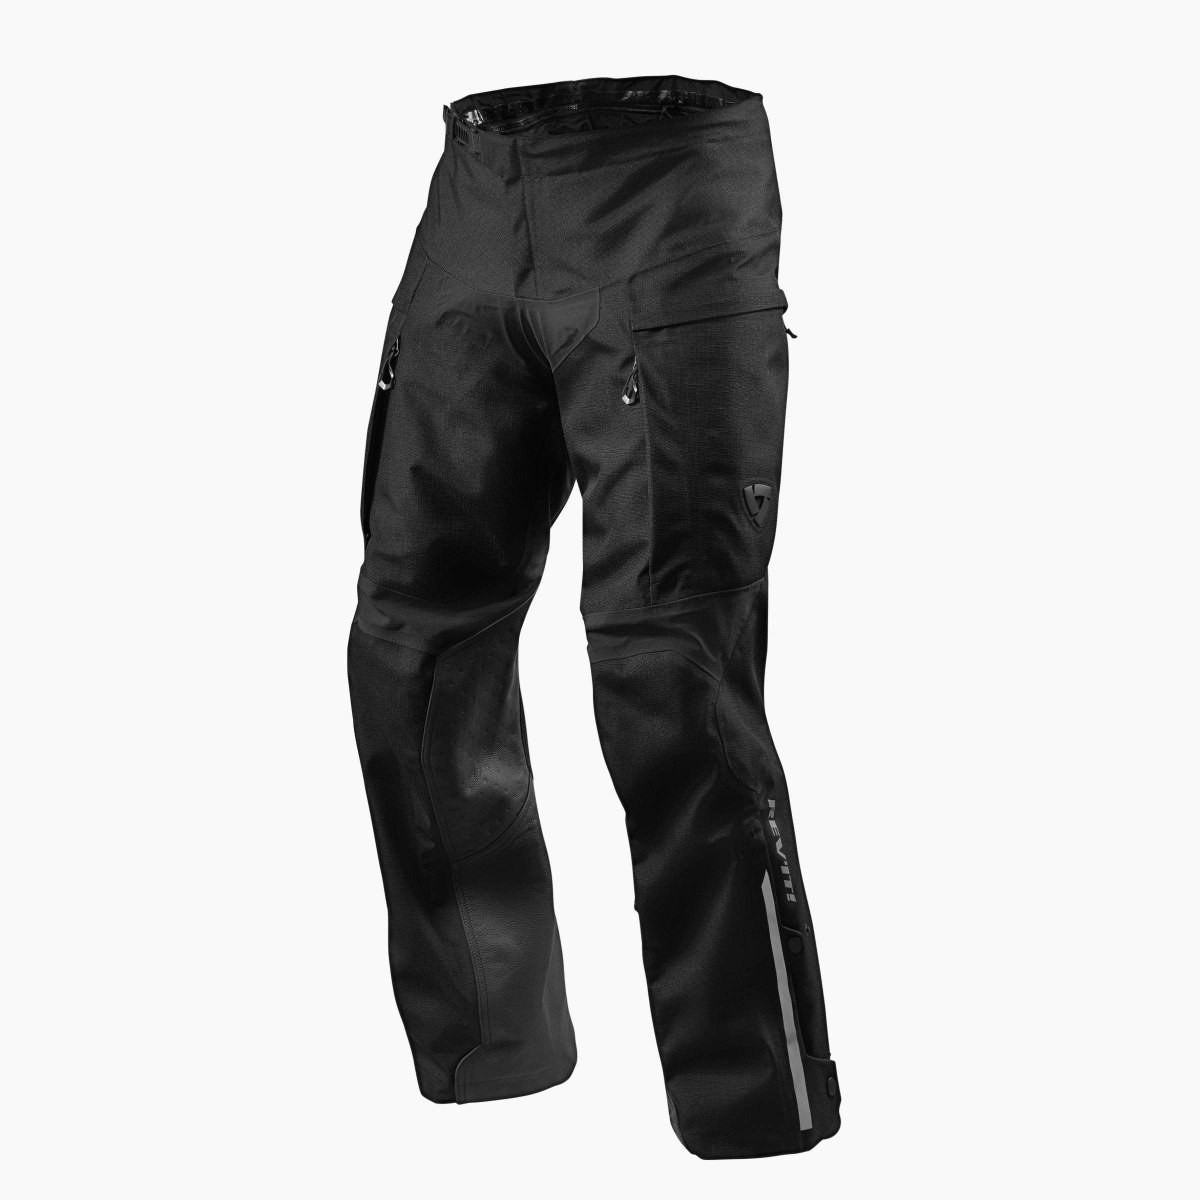 Image of REV'IT! Component H2O Long Black Motorcycle Pants Size XL ID 8700001317818